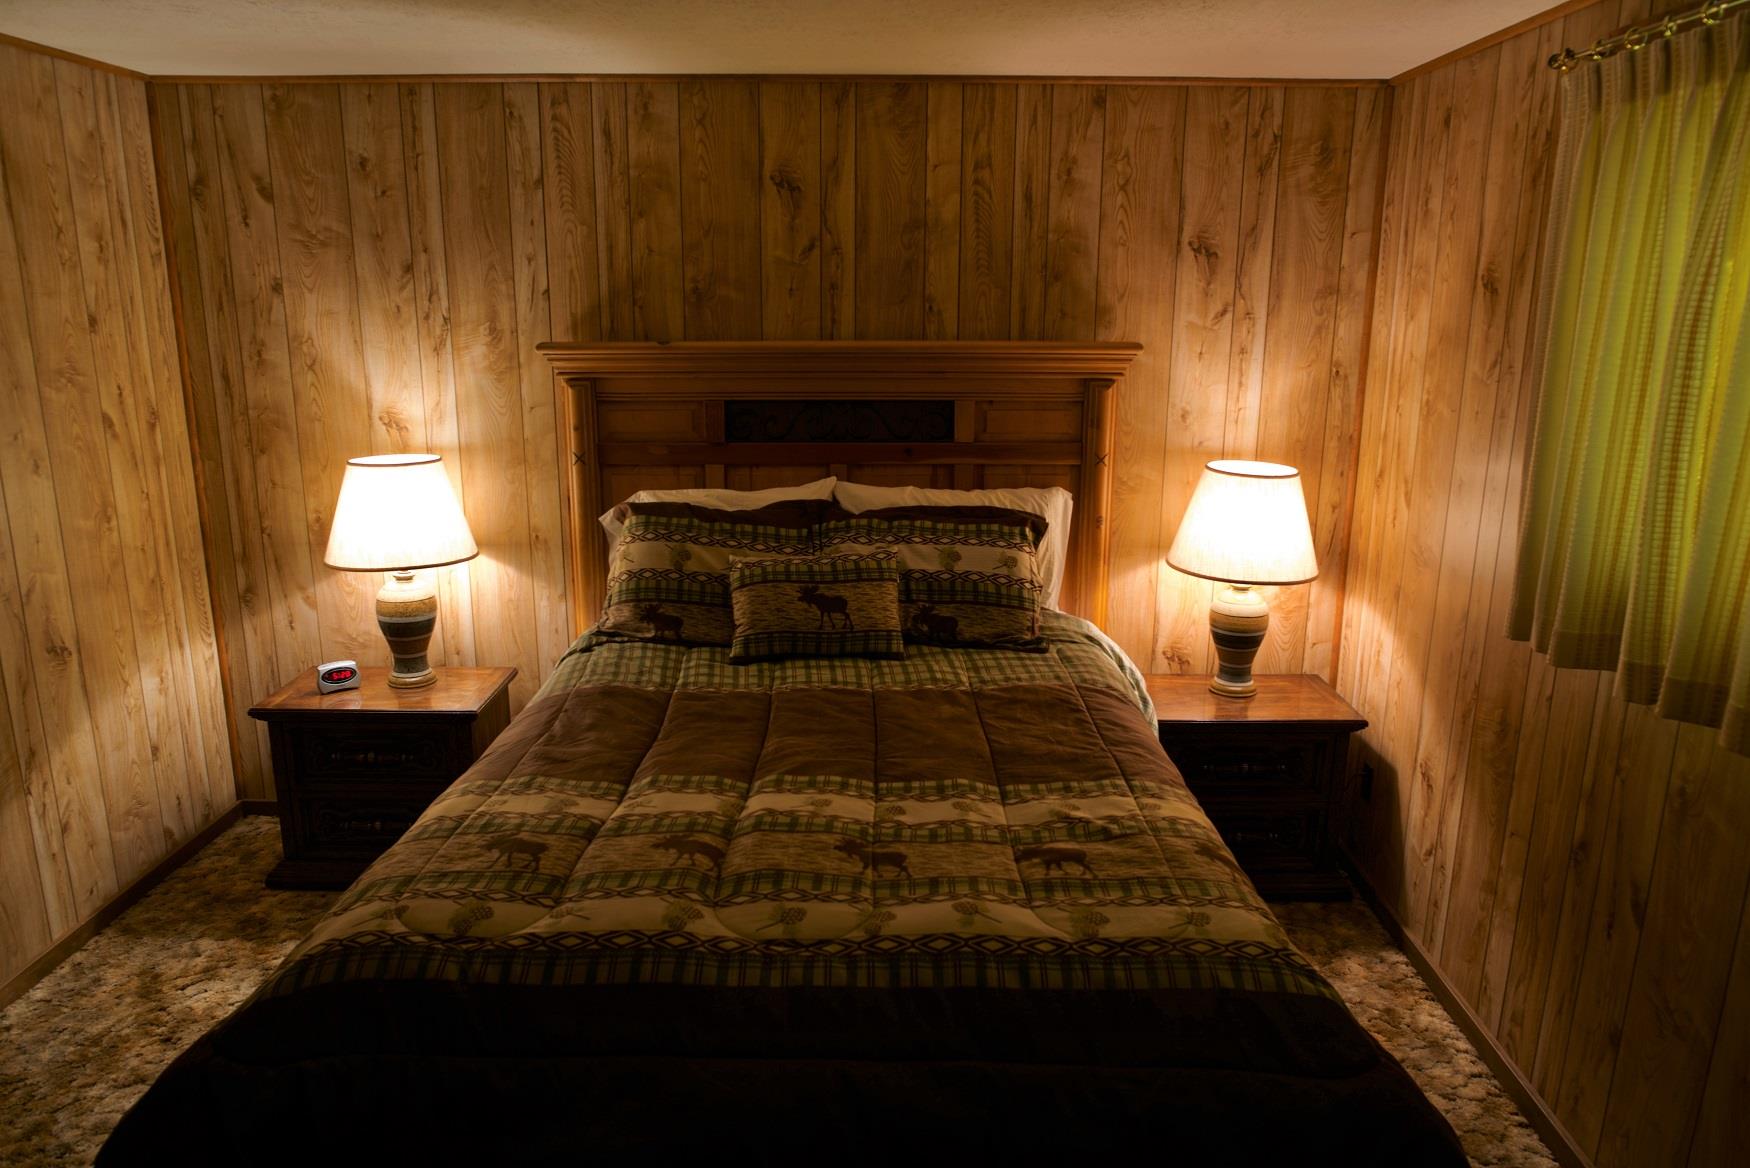 Get your best night sleep in the comfy queen bed in Haberman Cabin, at Cold Springs Resort & RV Park in Camp Sherman, Oregon